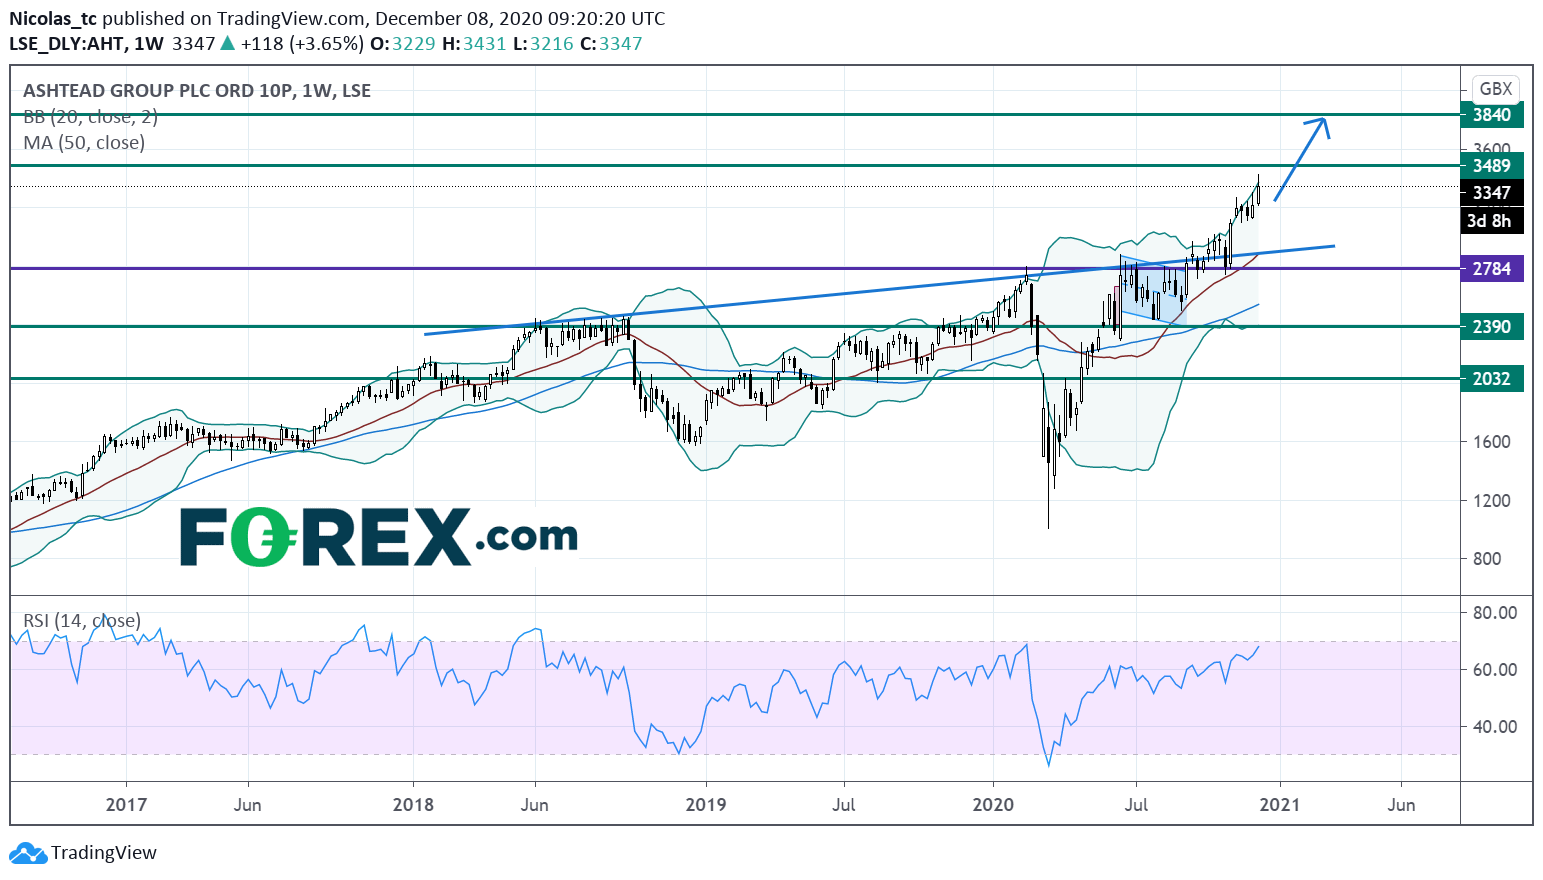 Market chart demonstrating Ashtead Group is continuing upward momentum. Published in December 2020 by FOREX.com